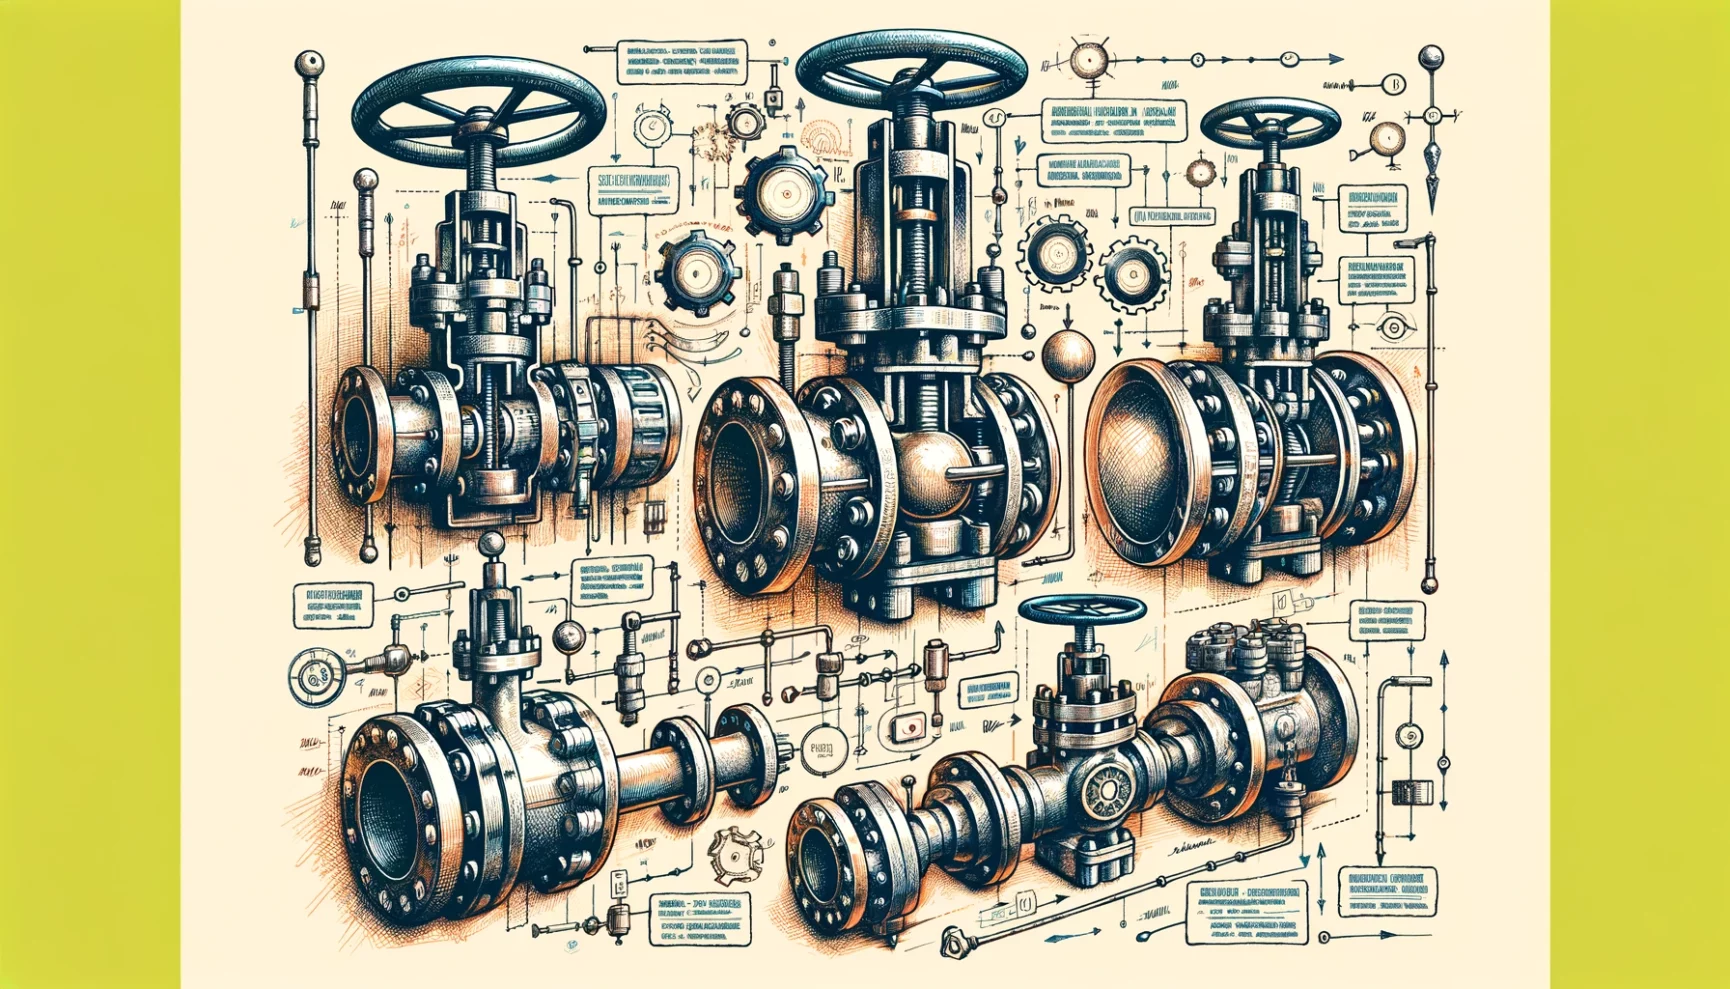 Technical illustration of various industrial valves with annotations.